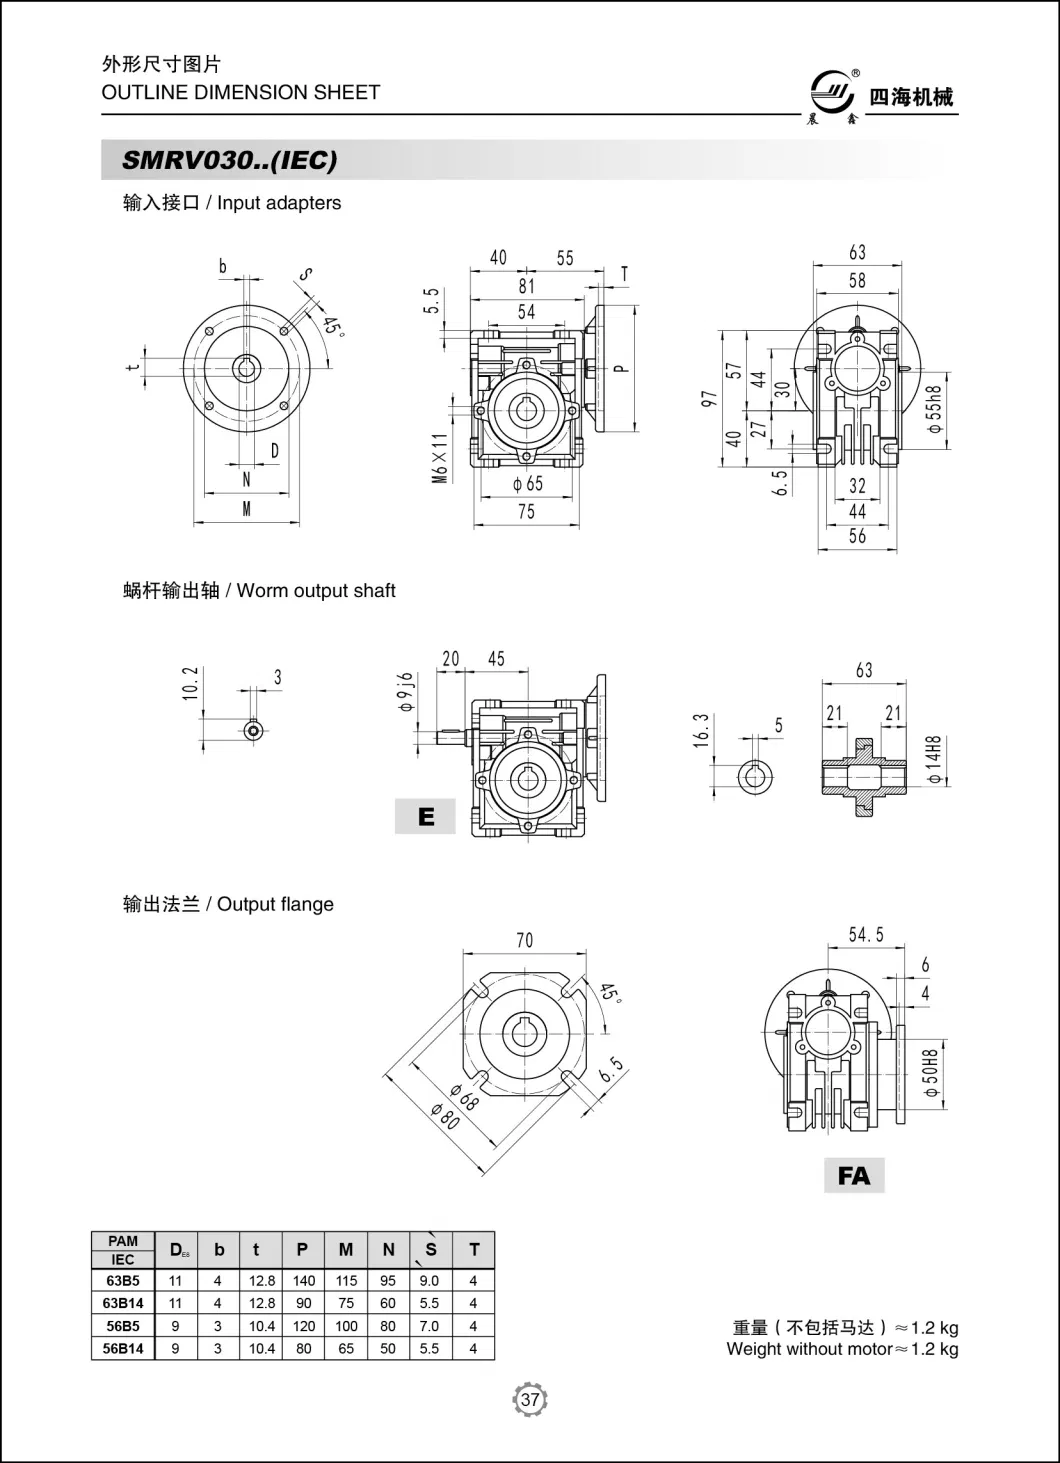 Aluminum Gearbox Cast Iron Housing Transmission Drive Motor Shaft Nmrv Smr Series Reduction Helical Cycloidal Cyclo Planetary Worm Gearboxes Speed Gear Reducer